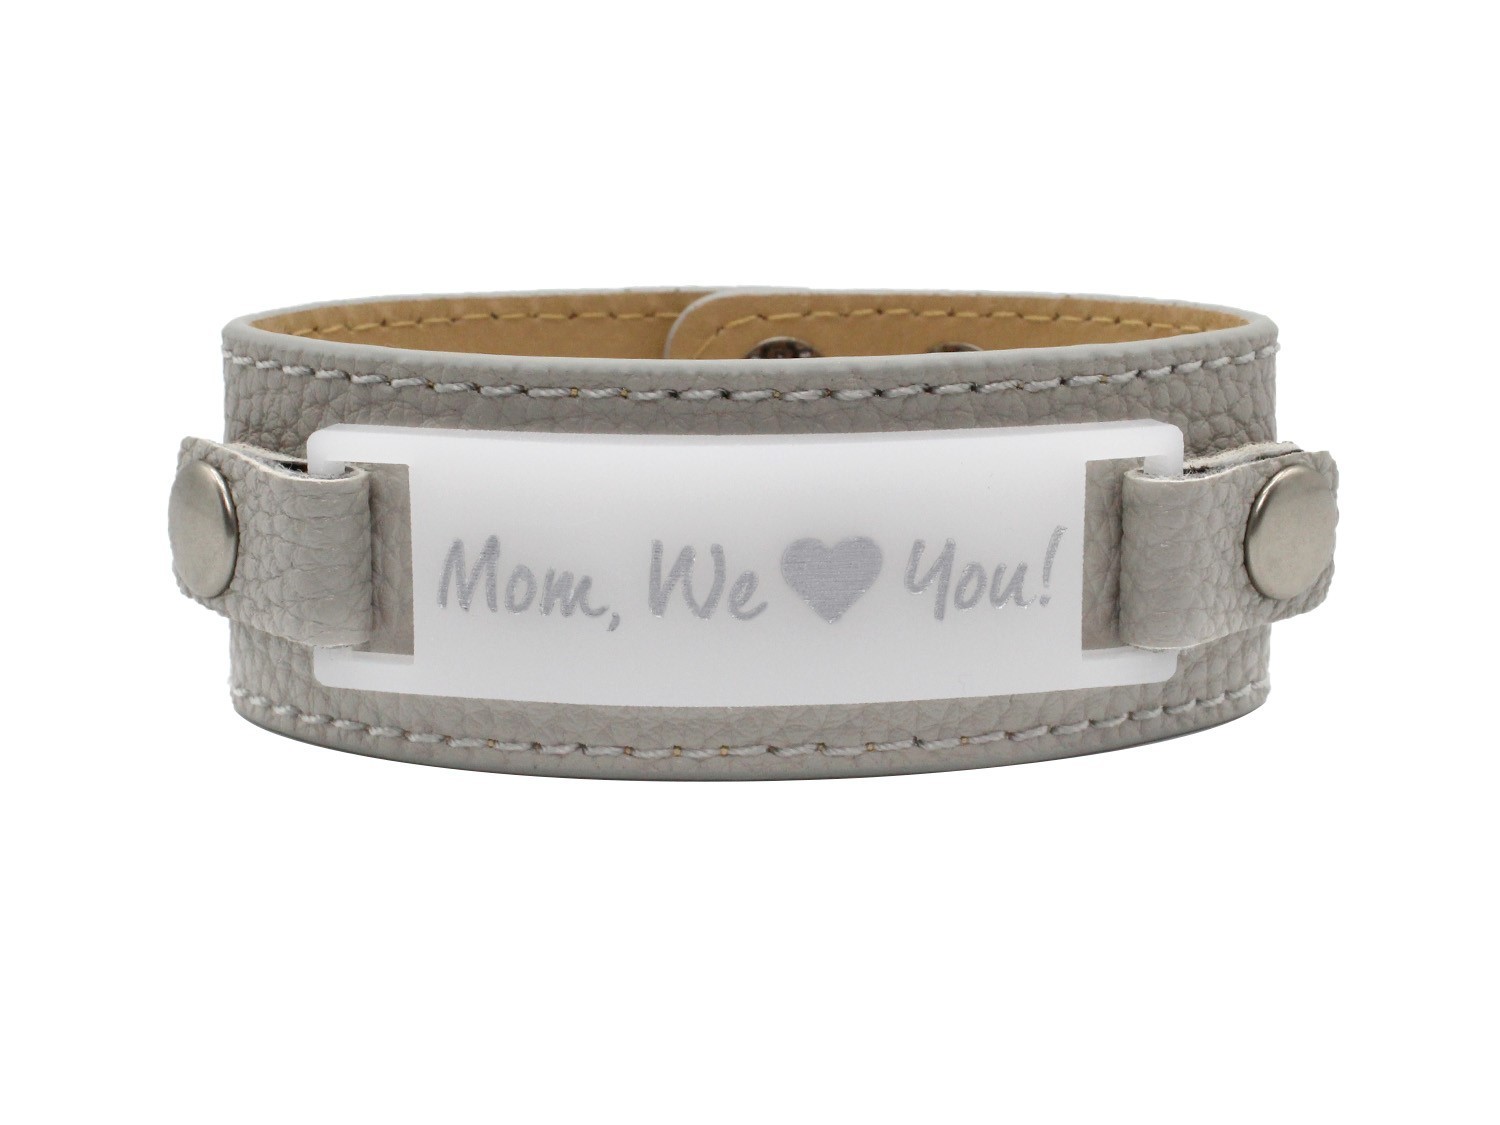 Personalized Cuff Bracelet with Message of Love